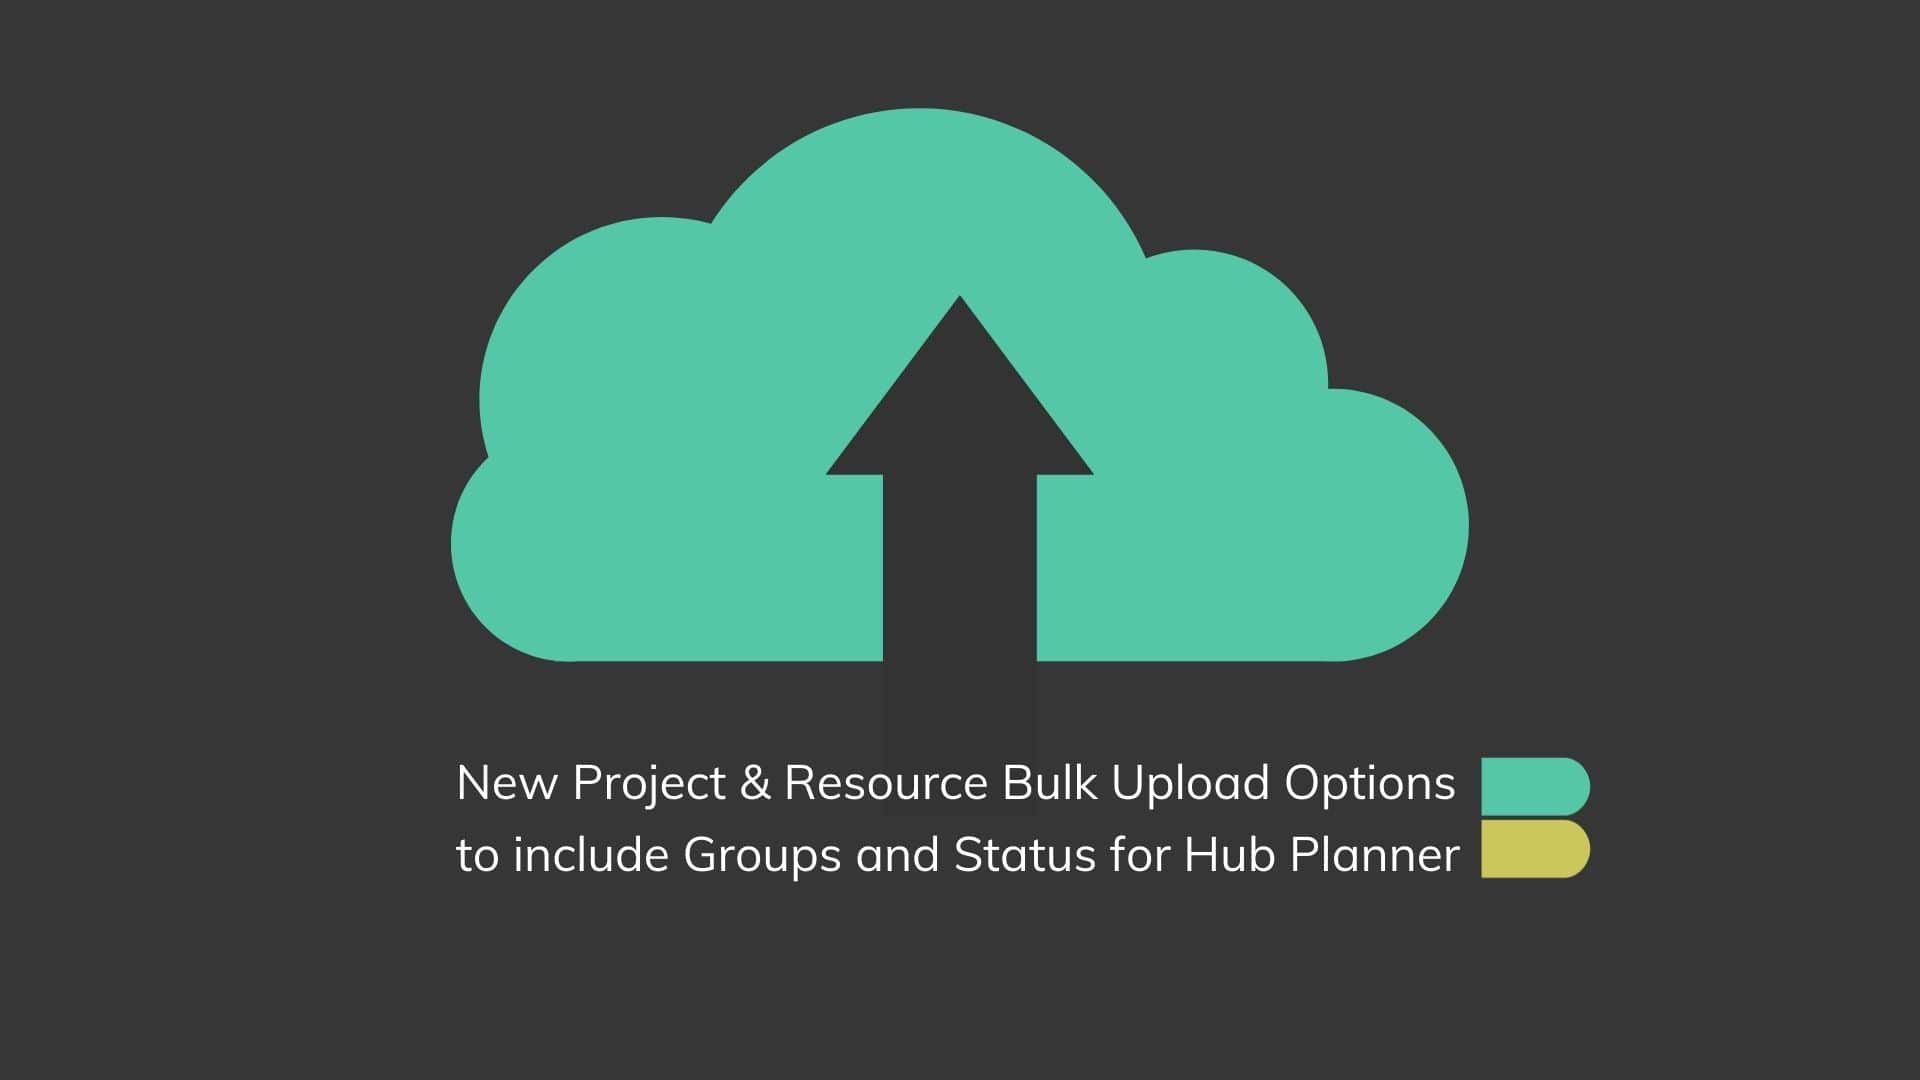 New Project & Resource Bulk Upload Options to include Groups and Status for Hub Planner